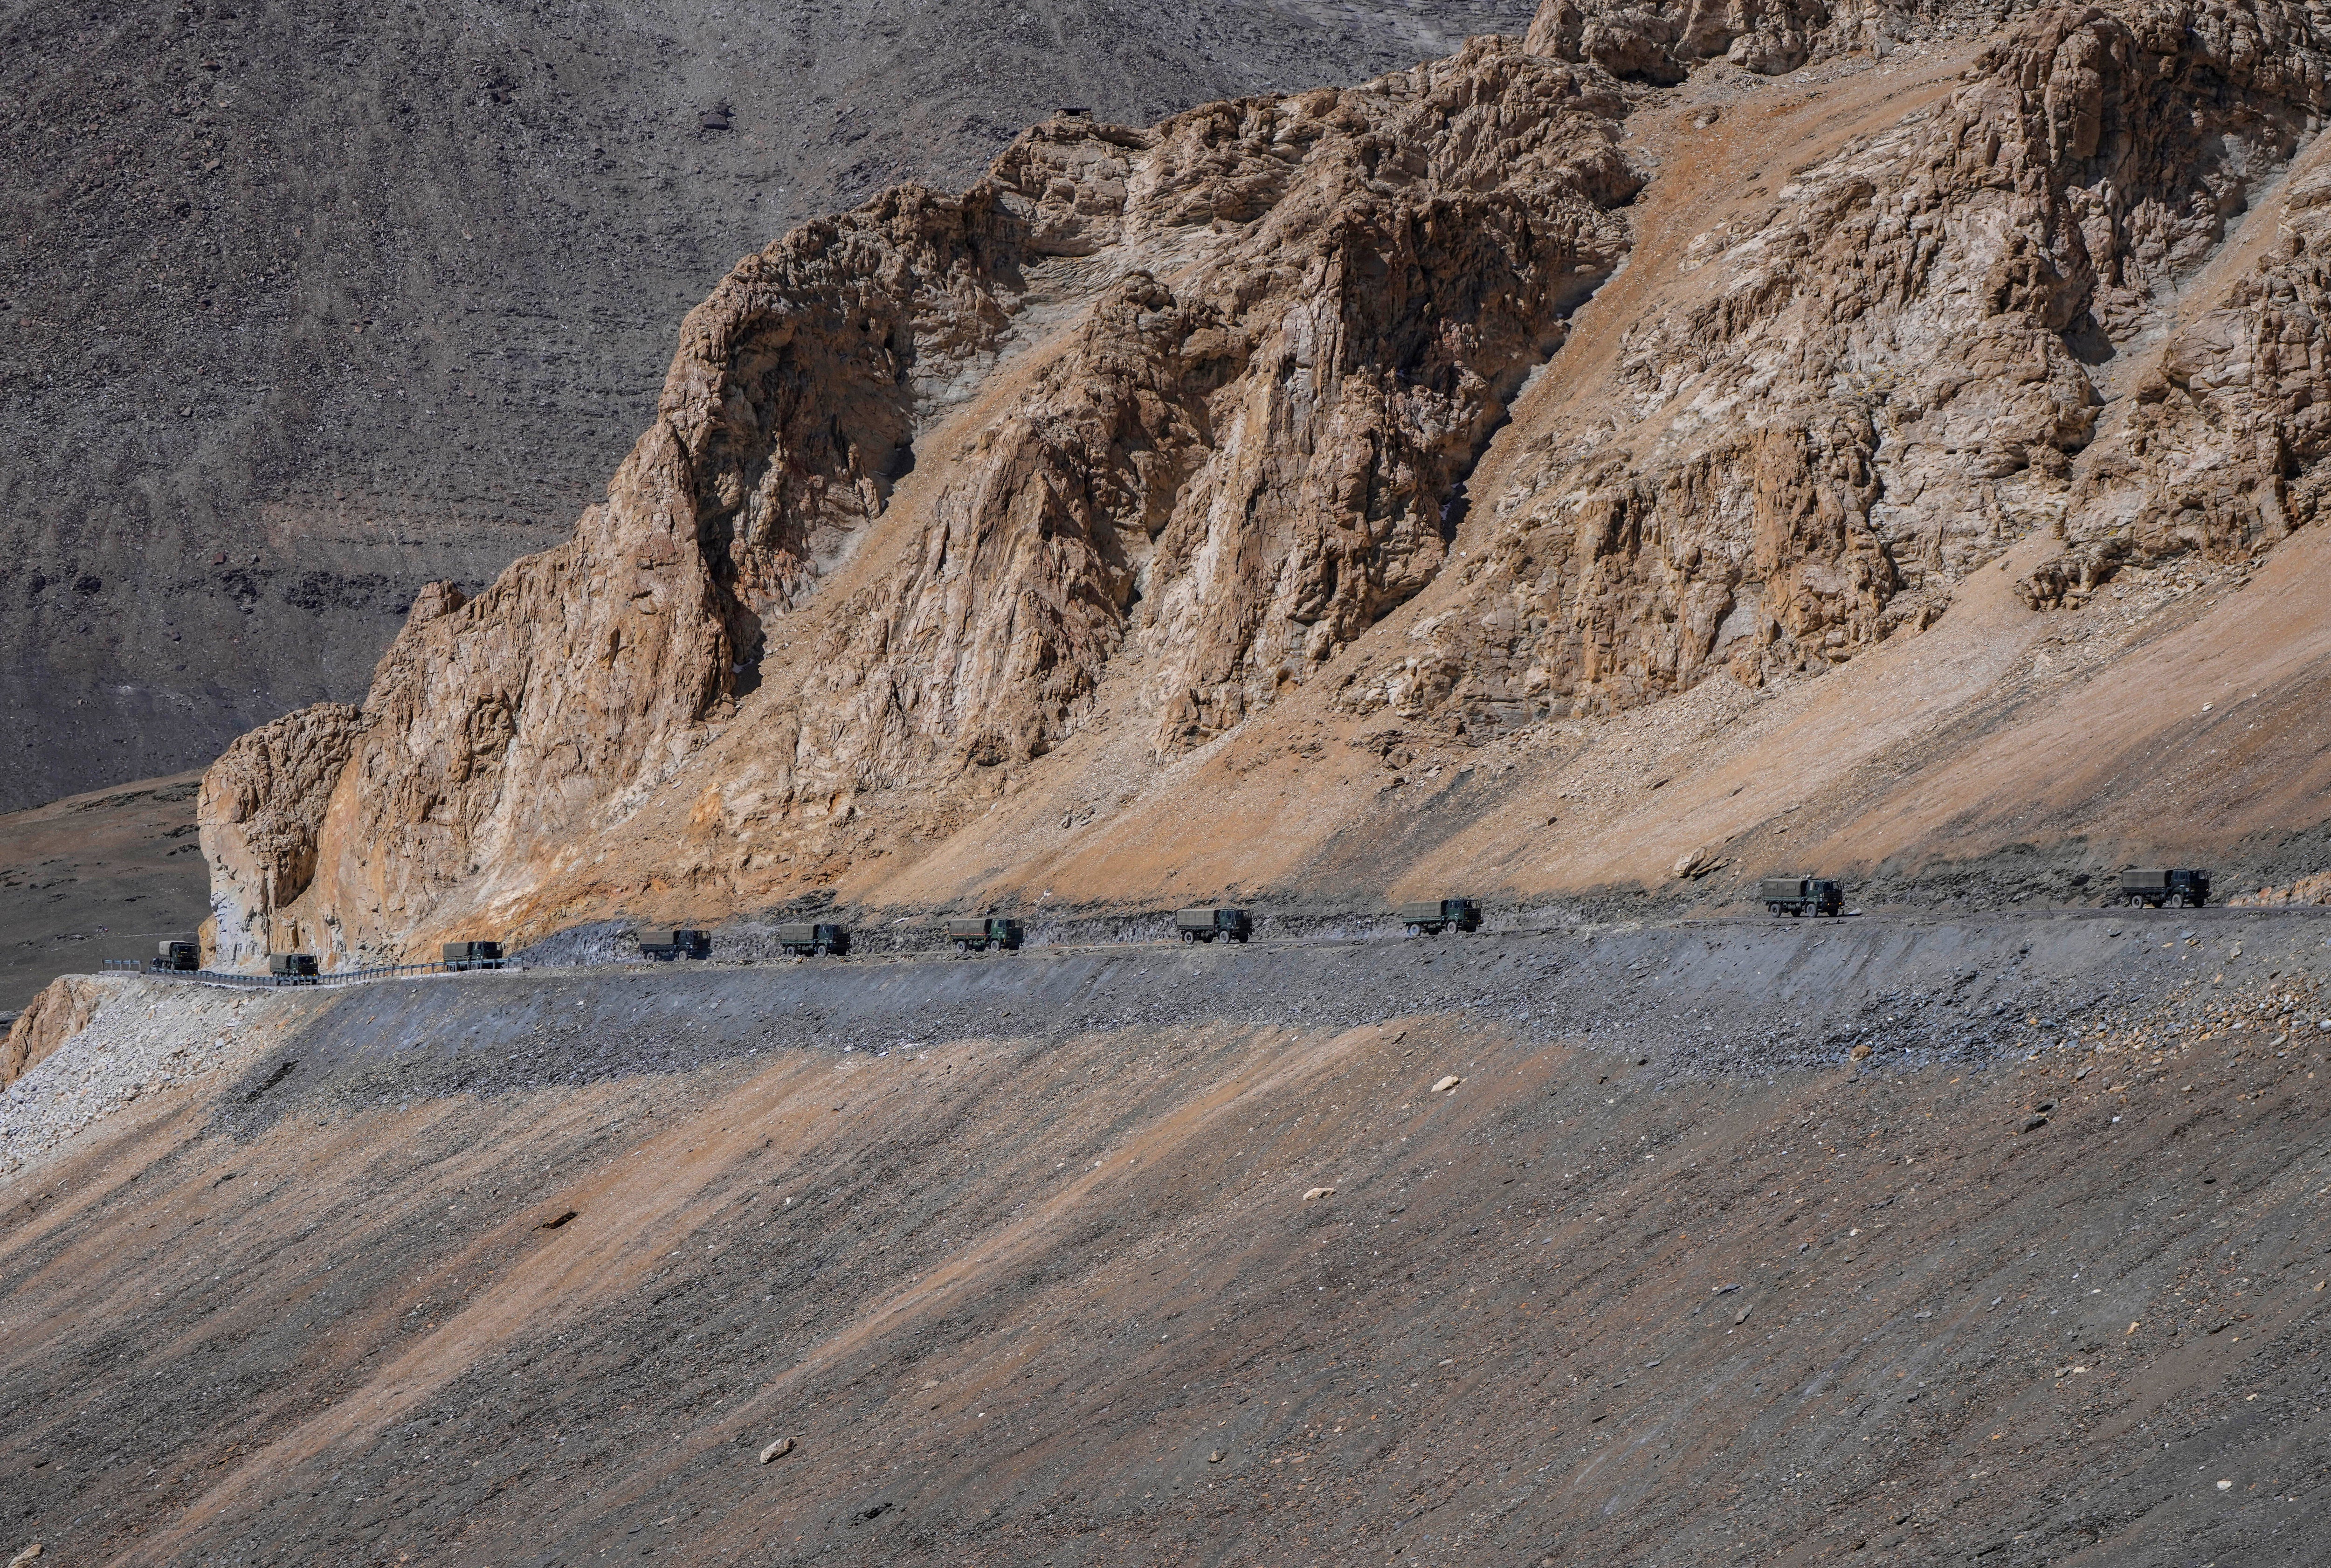 Indian army vehicles move in a convoy in the cold desert region of Ladakh, where India and China are locked in a military standoff,